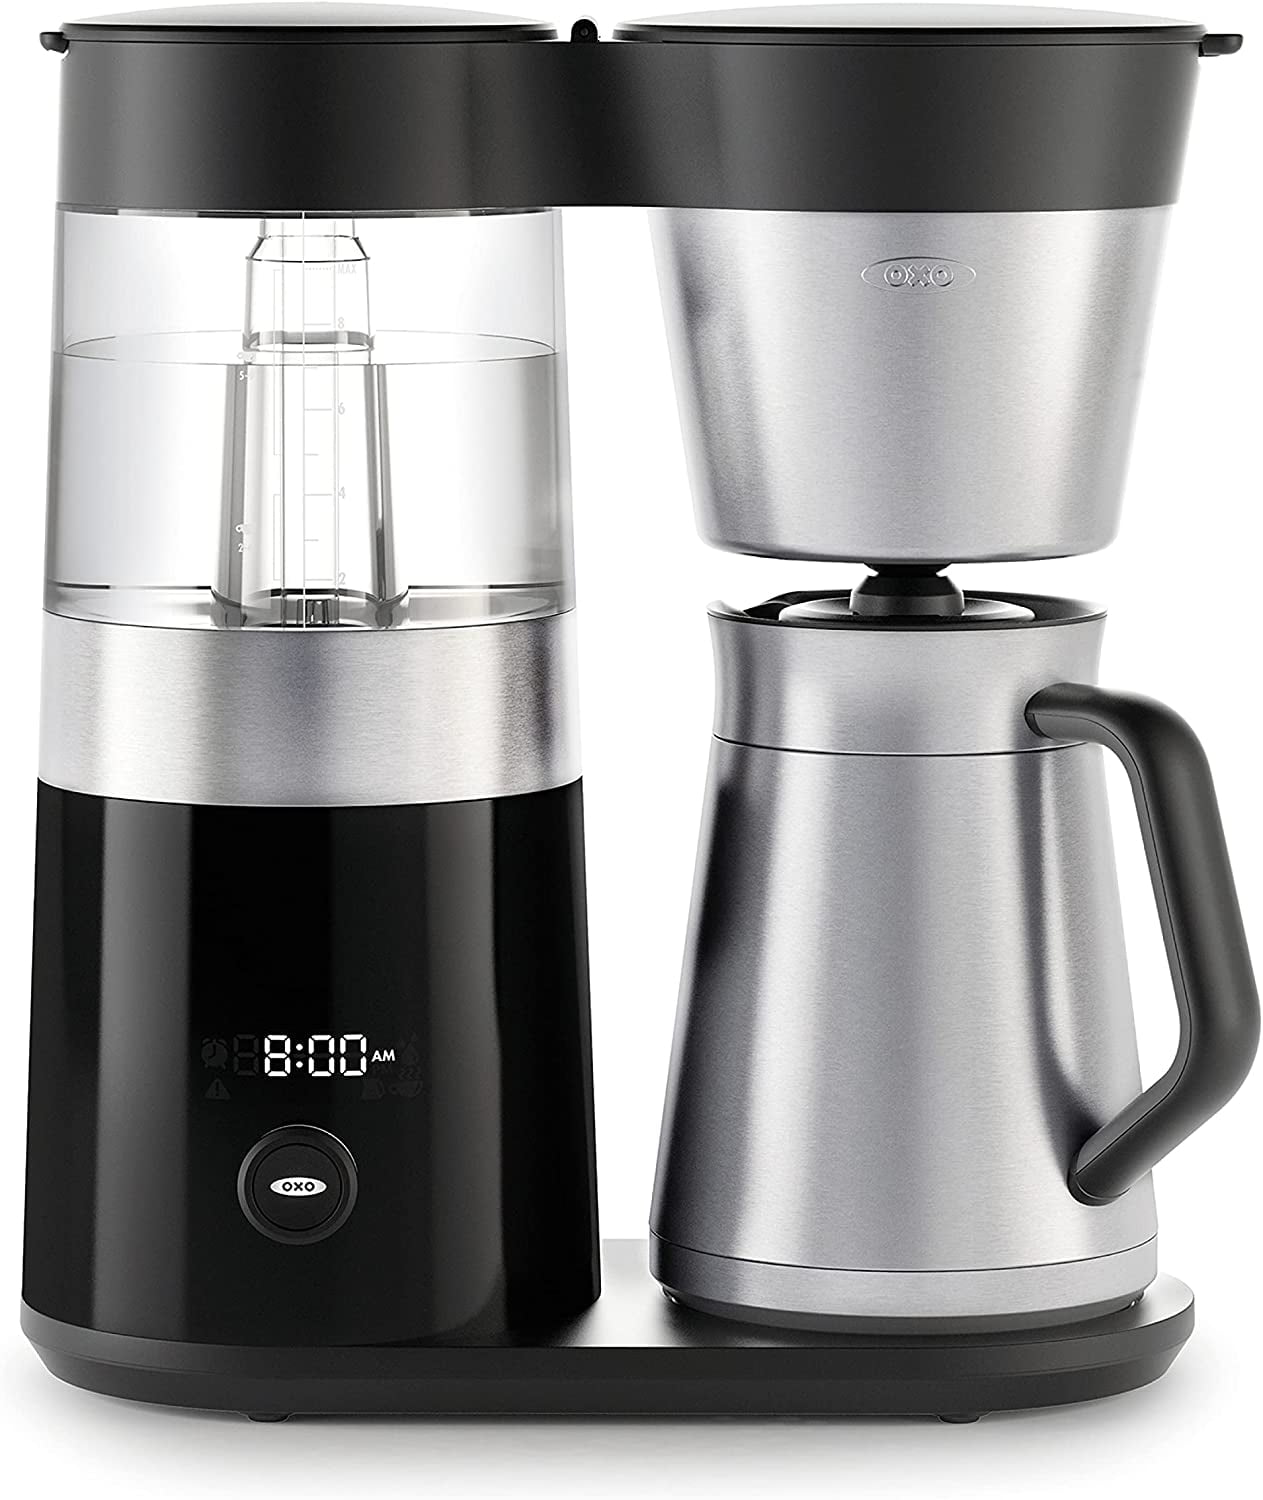 OXO 9-Cup Stainless Steel Drip Coffee Maker with Stainless Steel Carafe  8710100 - The Home Depot